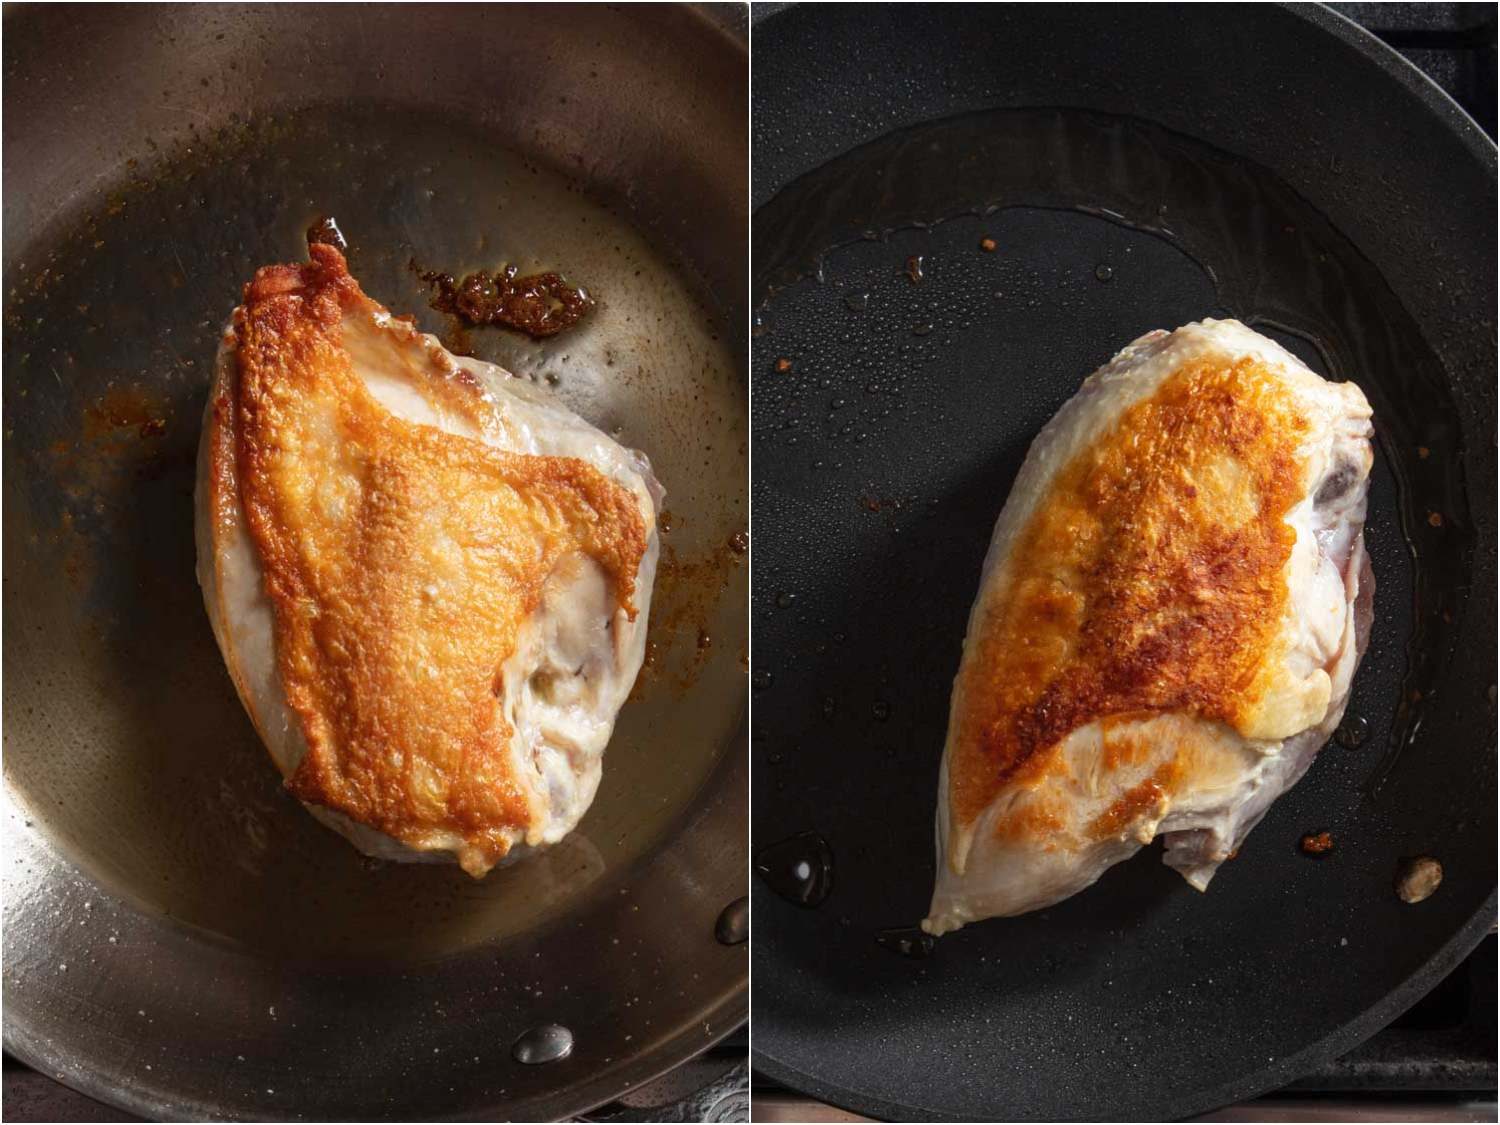 Seen from above, two samples of chicken breast show the difference between stainless steel and nonstick pans: the breast cooked in the stainless skillet is browned from edge-to-edge, whereas the chicken cooked in the nonstick skillet does not have browning that extends to the edges